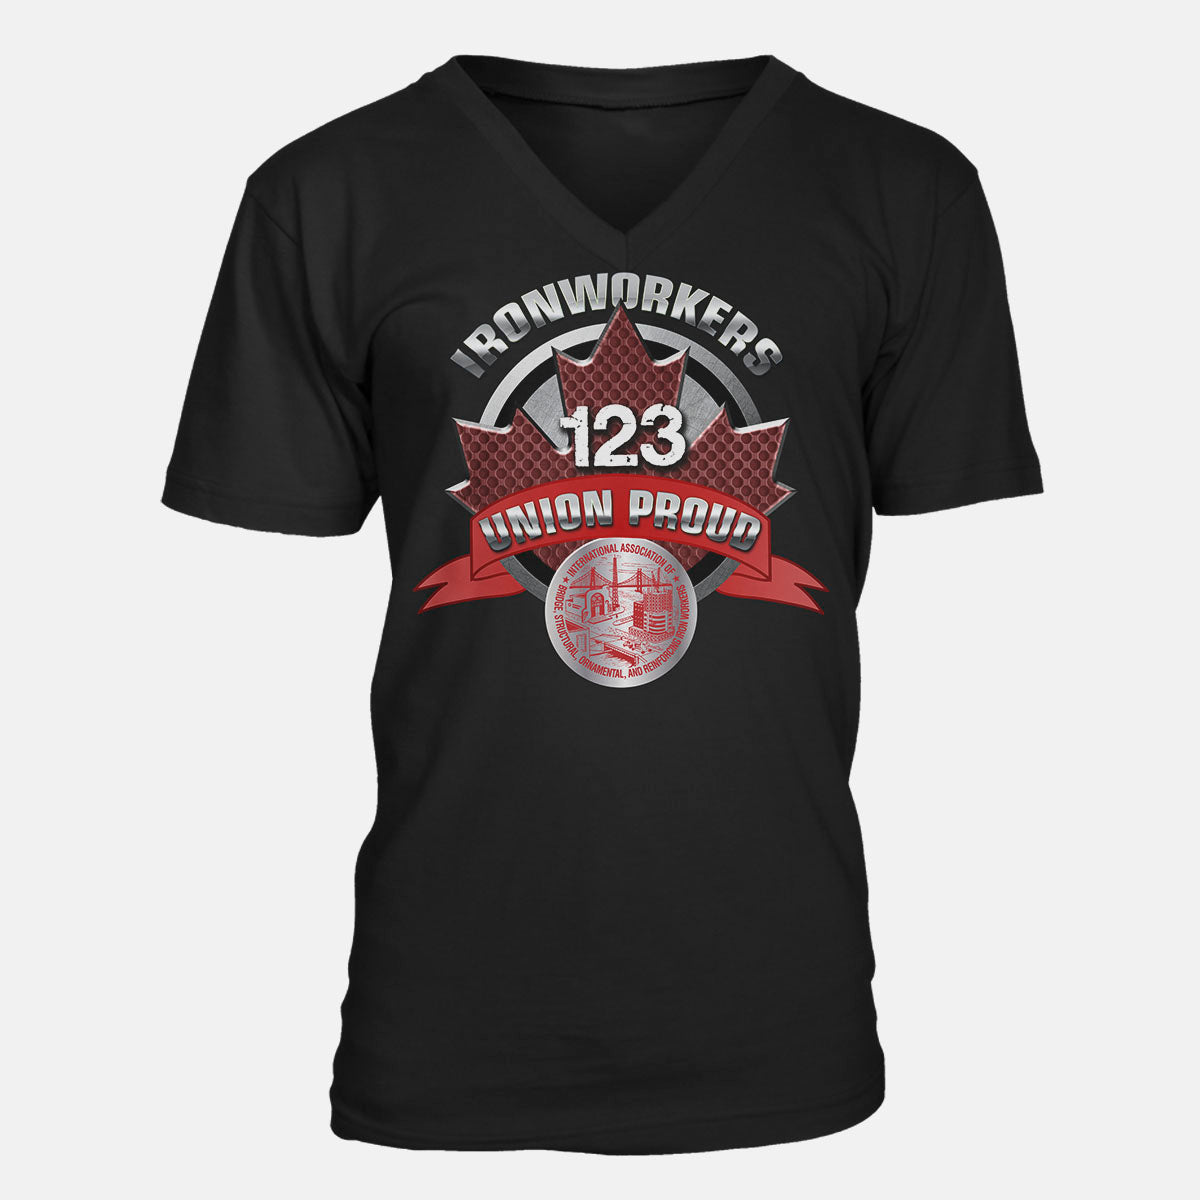 Ironworkers Round Canada Apparel